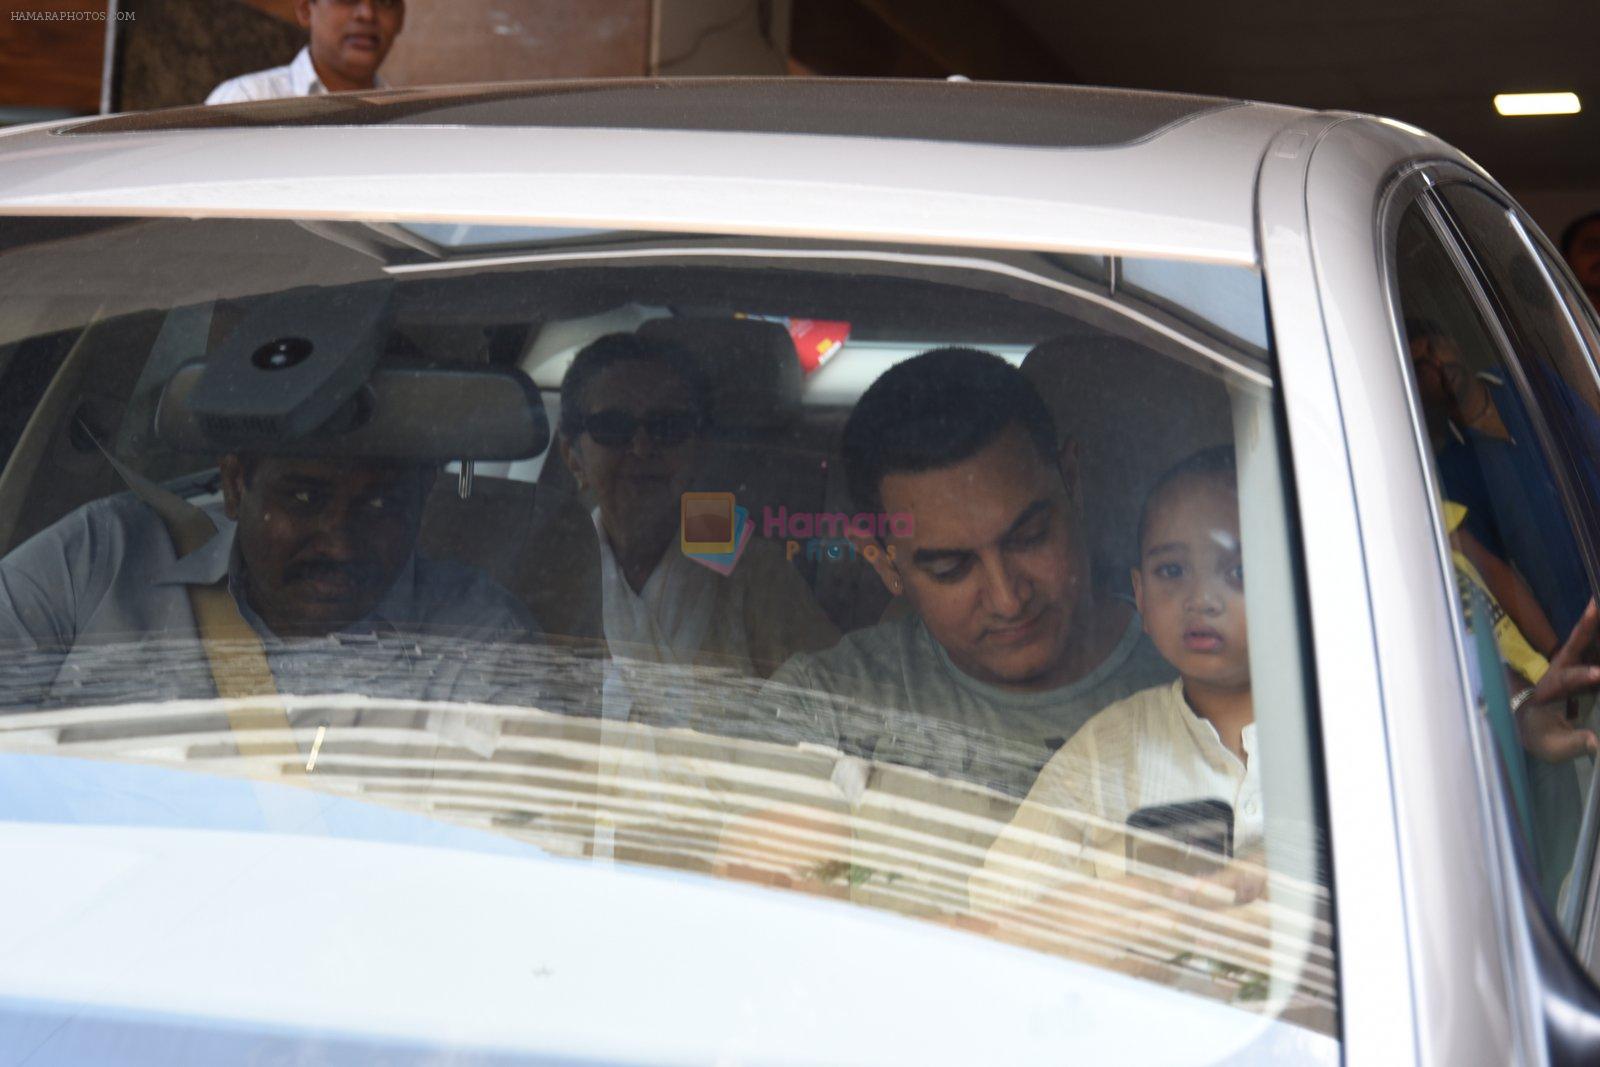 Aamir Khan takes off to Hilton Shilim with Azad for his birthday bash in Mumbai on 13th March 2015